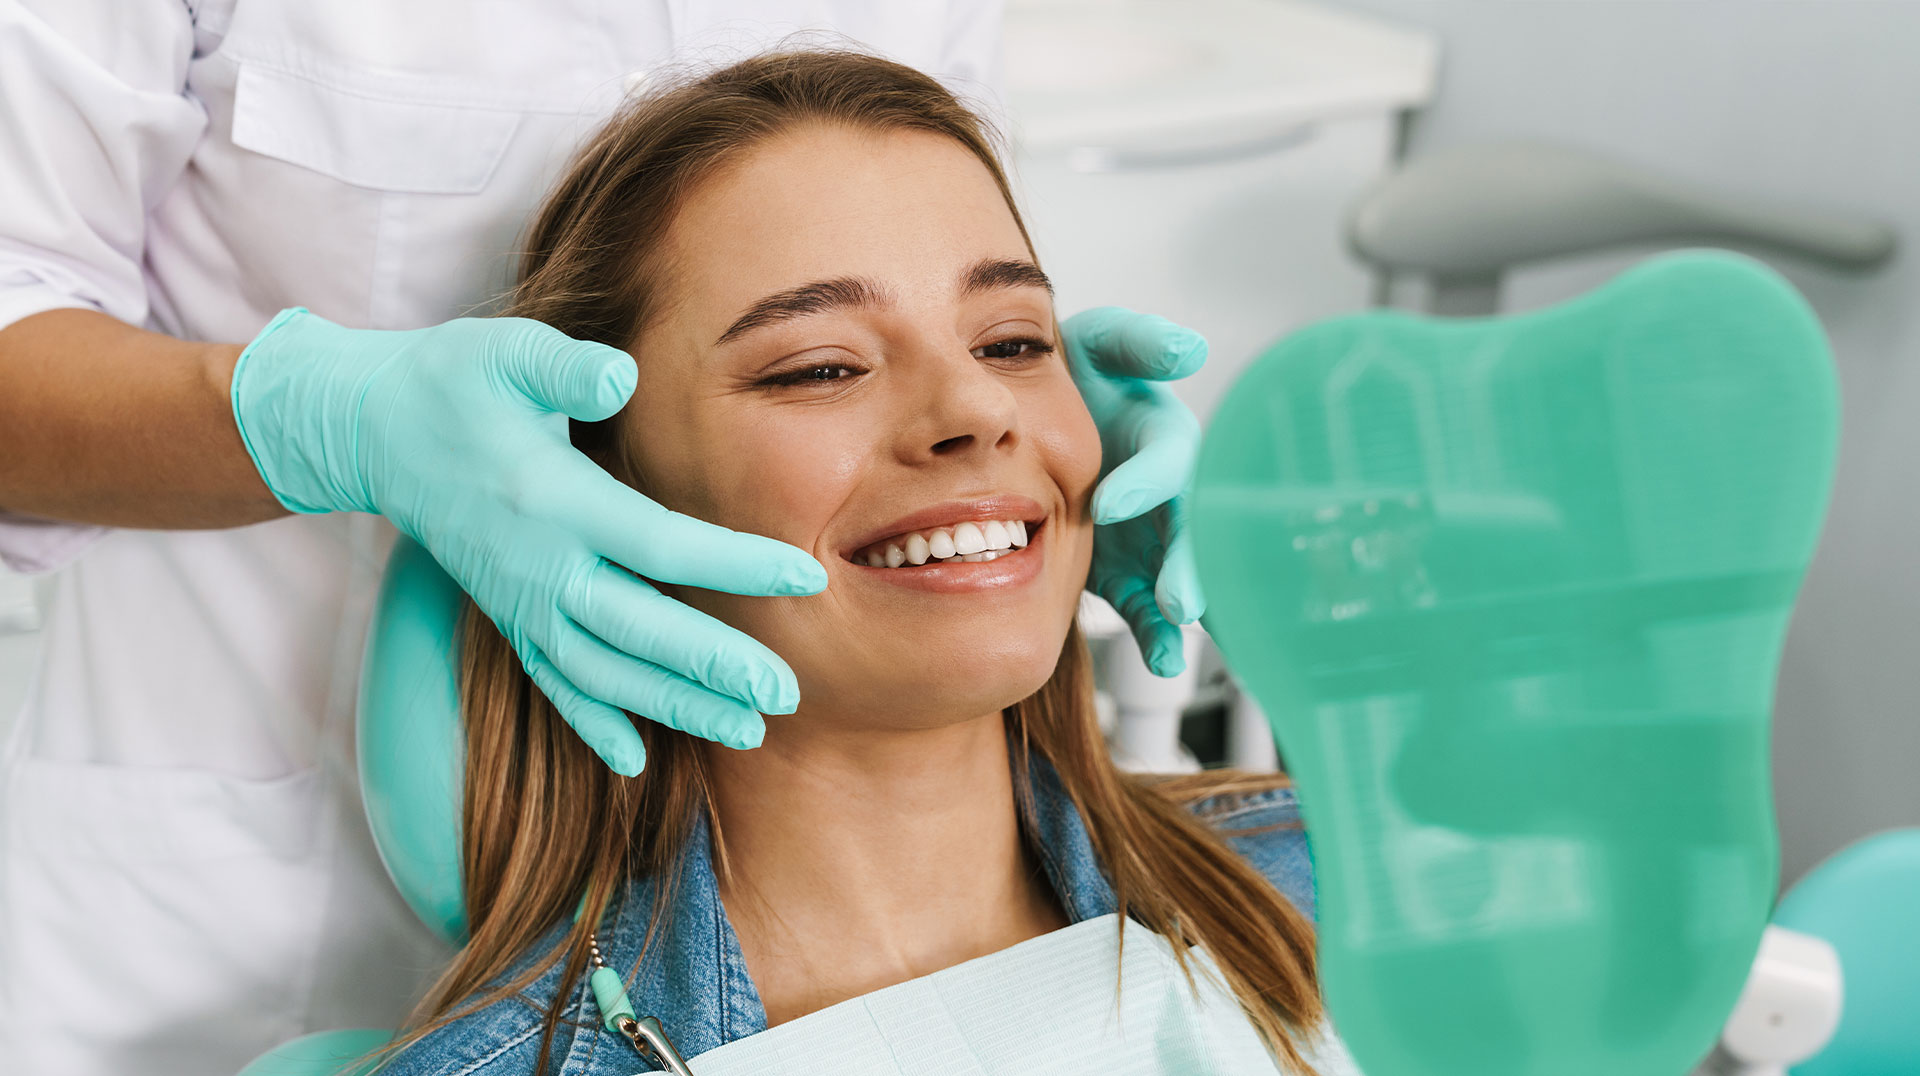 A smiling woman in a dental chair receiving a dental cleaning, with a dental hygienist working on her teeth.